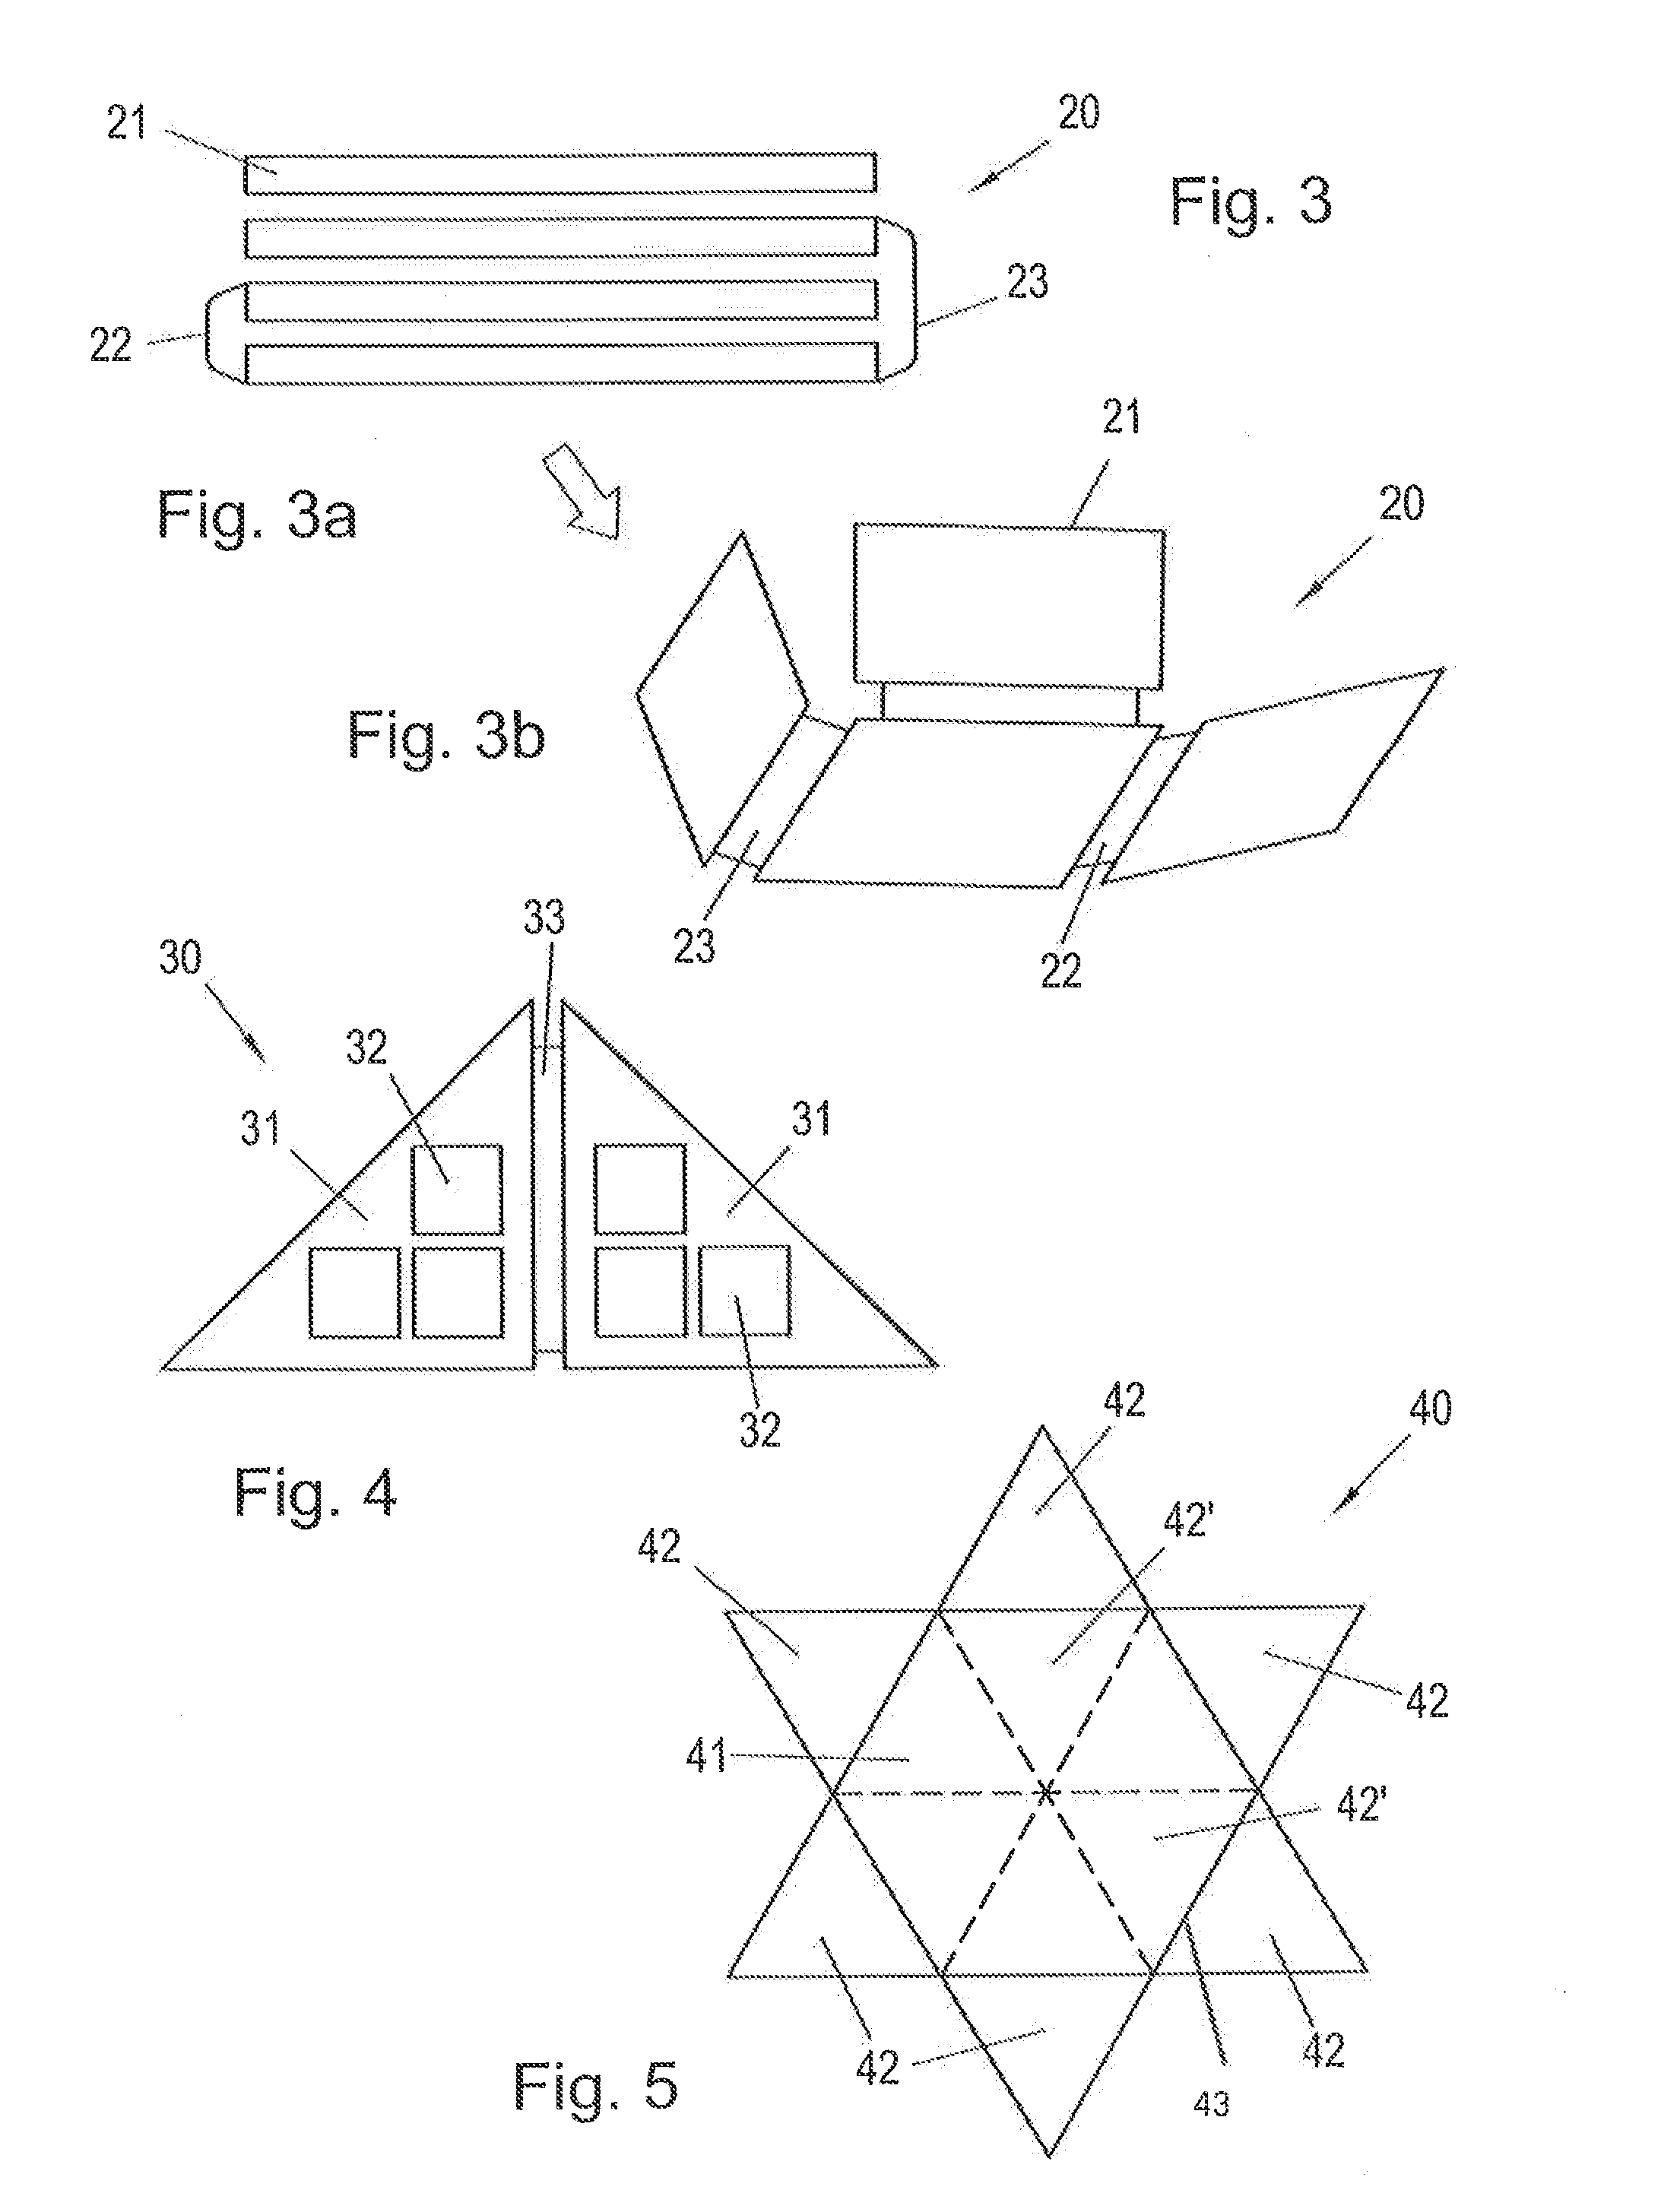 Photovoltaic module and use thereof